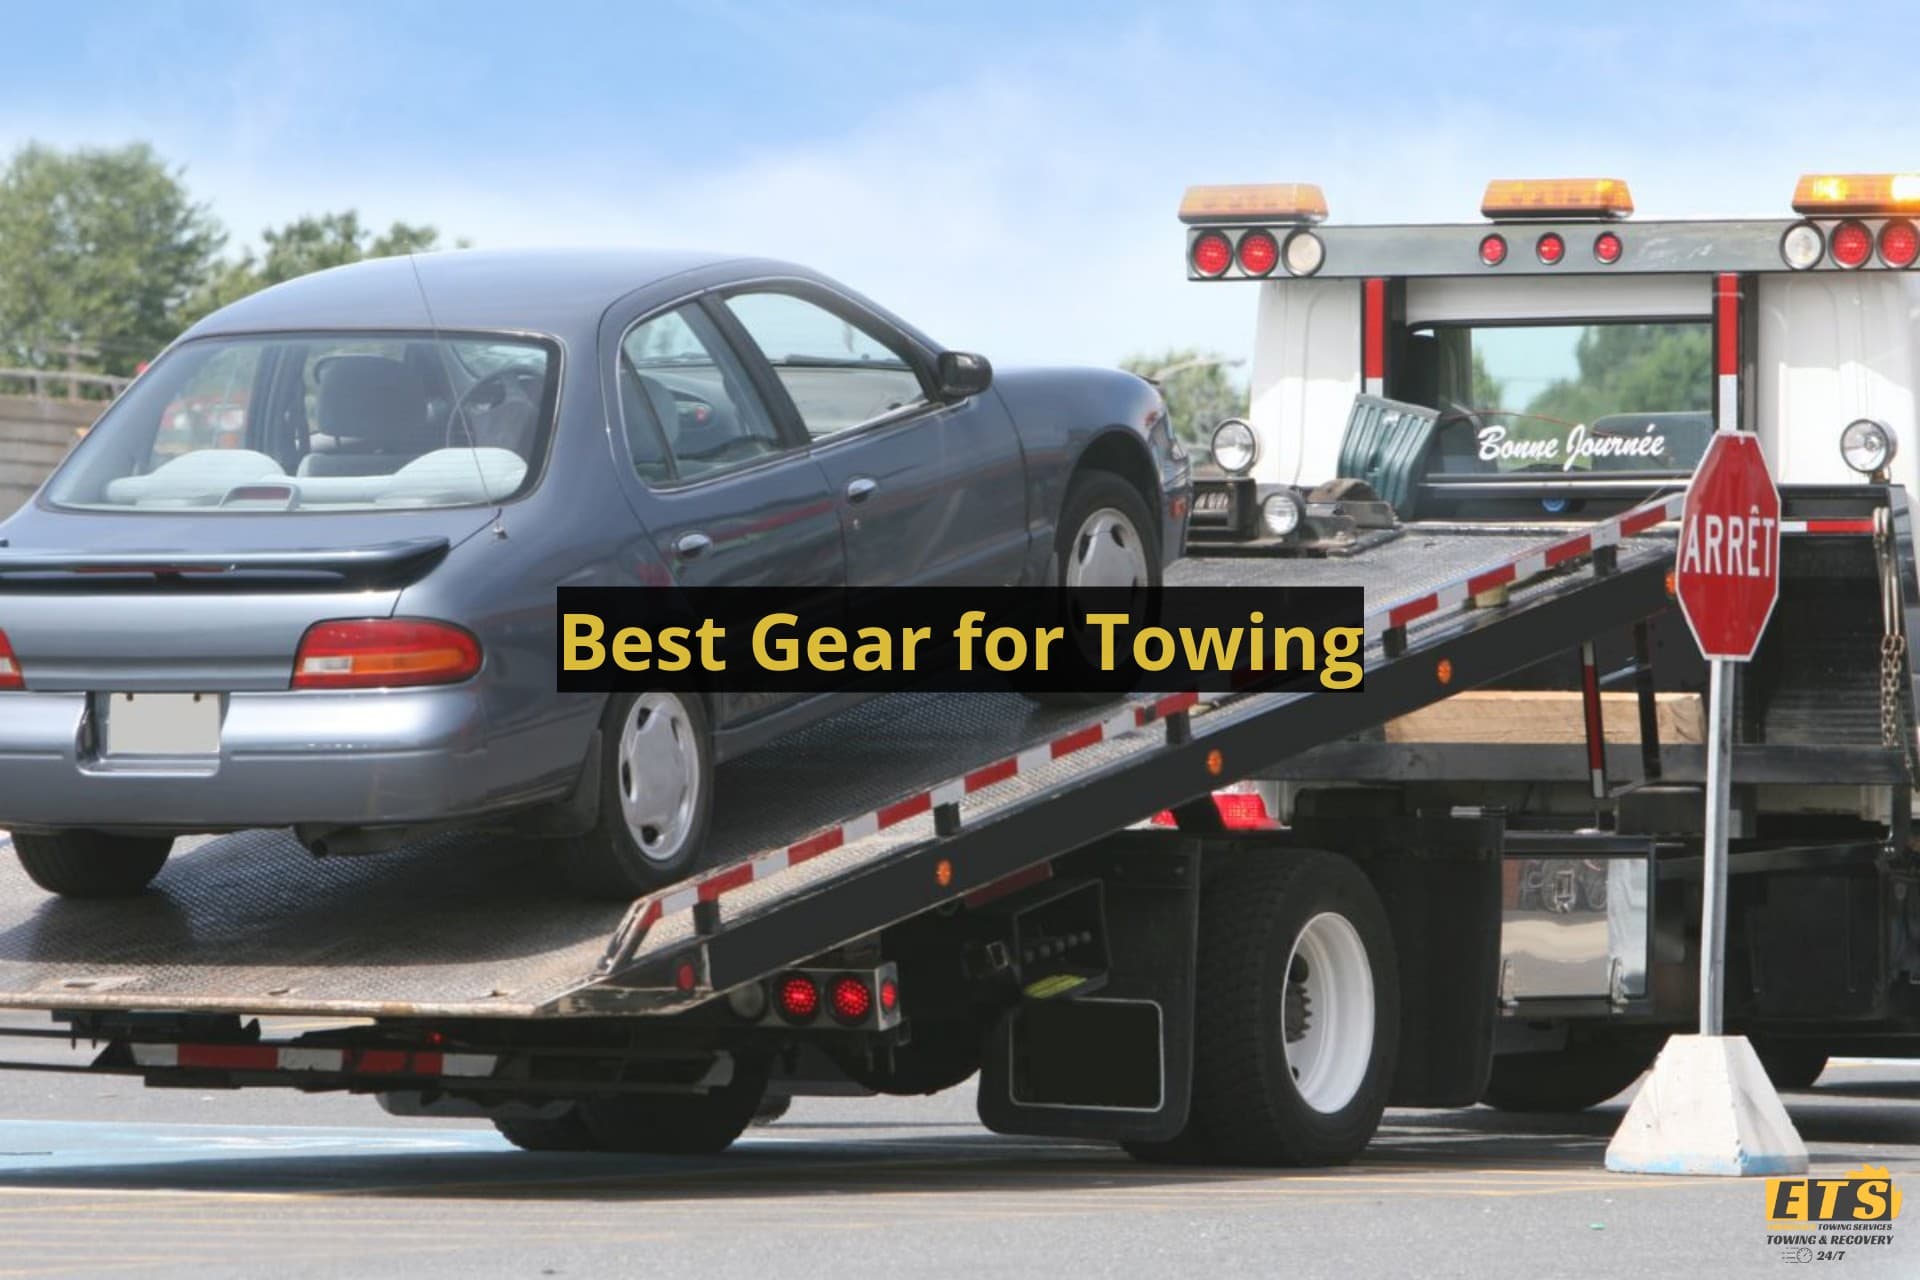 Best Gear for Towing